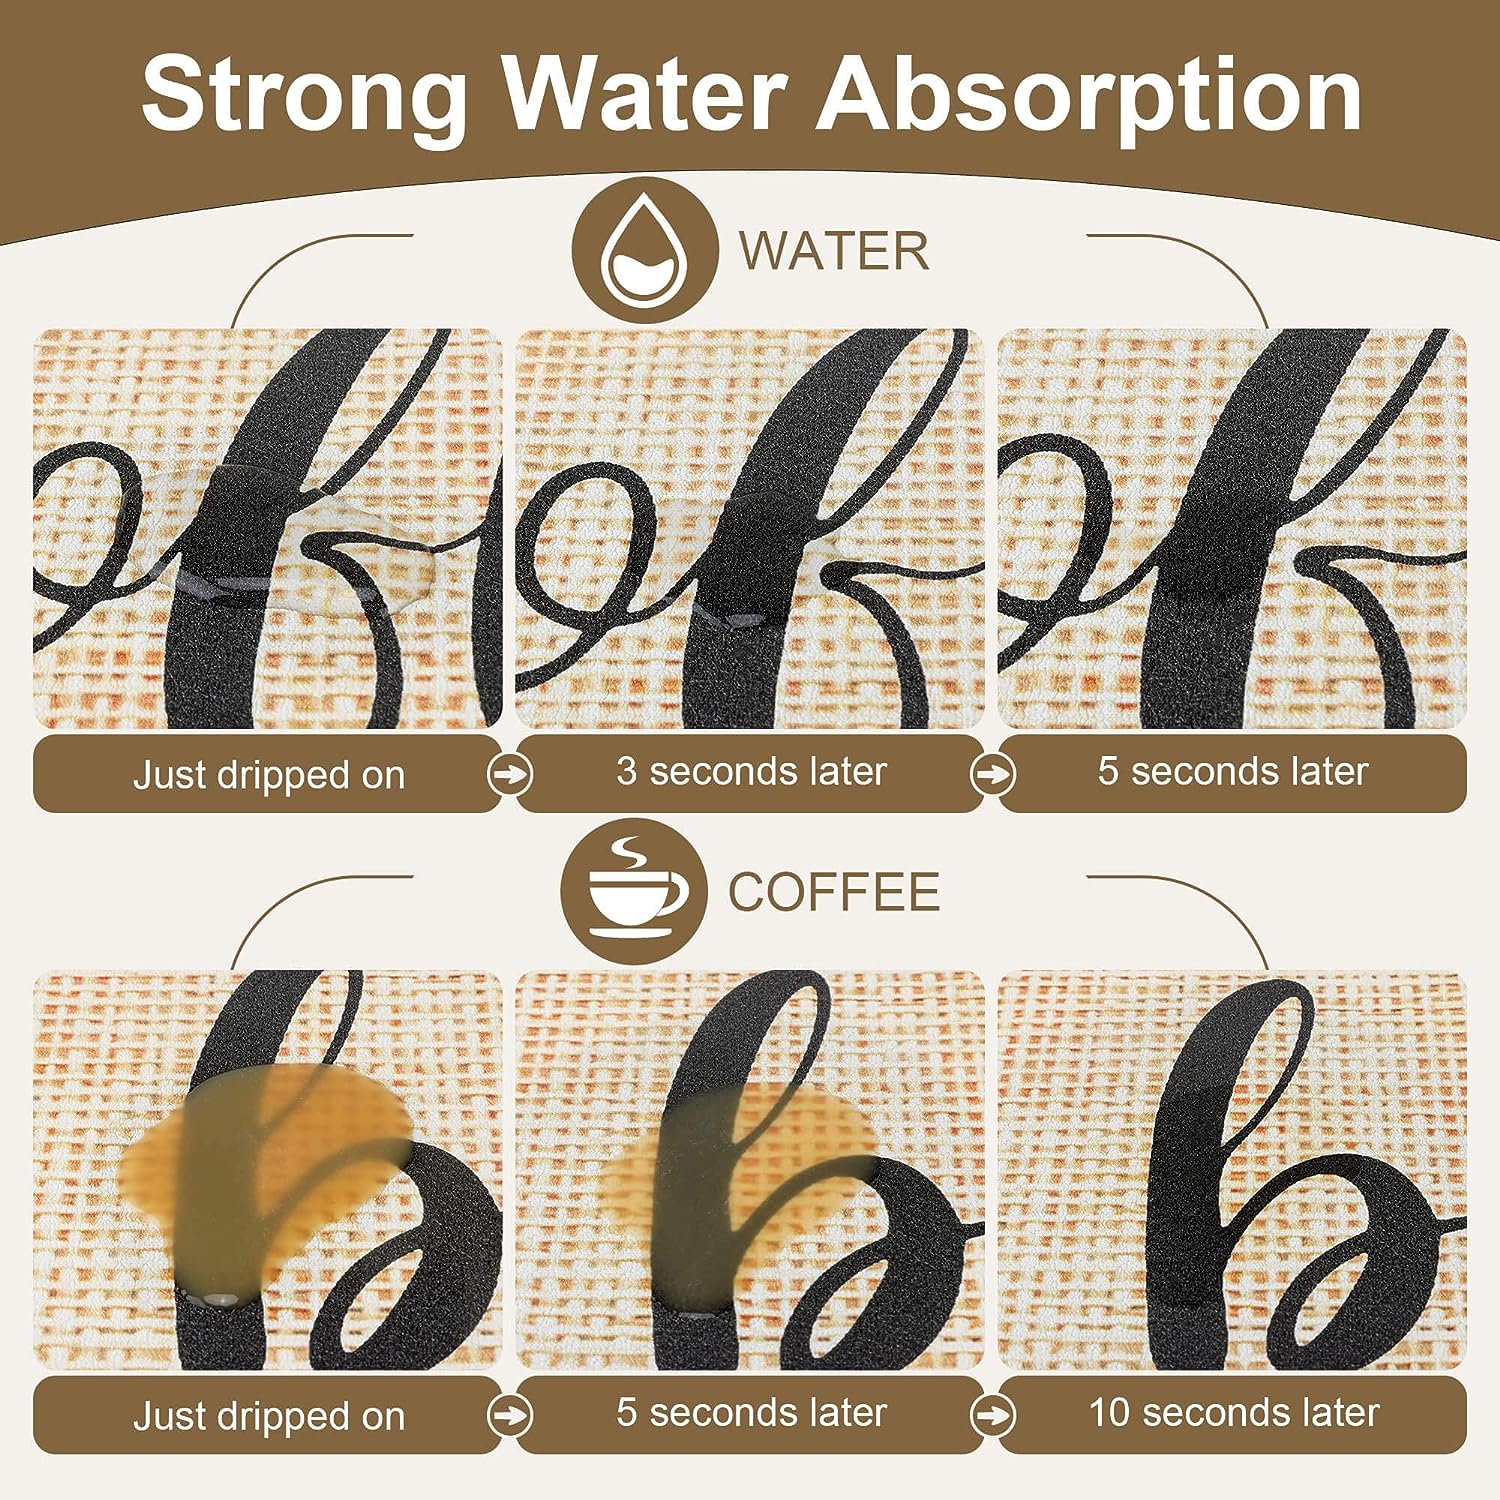 DK177 Coffee Mat Coffee Bar Mat - Hide Stain Absorbent Rubber Backed Quick Drying Mat Fit Under Coffee Maker Espresso Machine - Coffee Bar Accessories Kitchen Counter Dish Drying Mat, 19x12